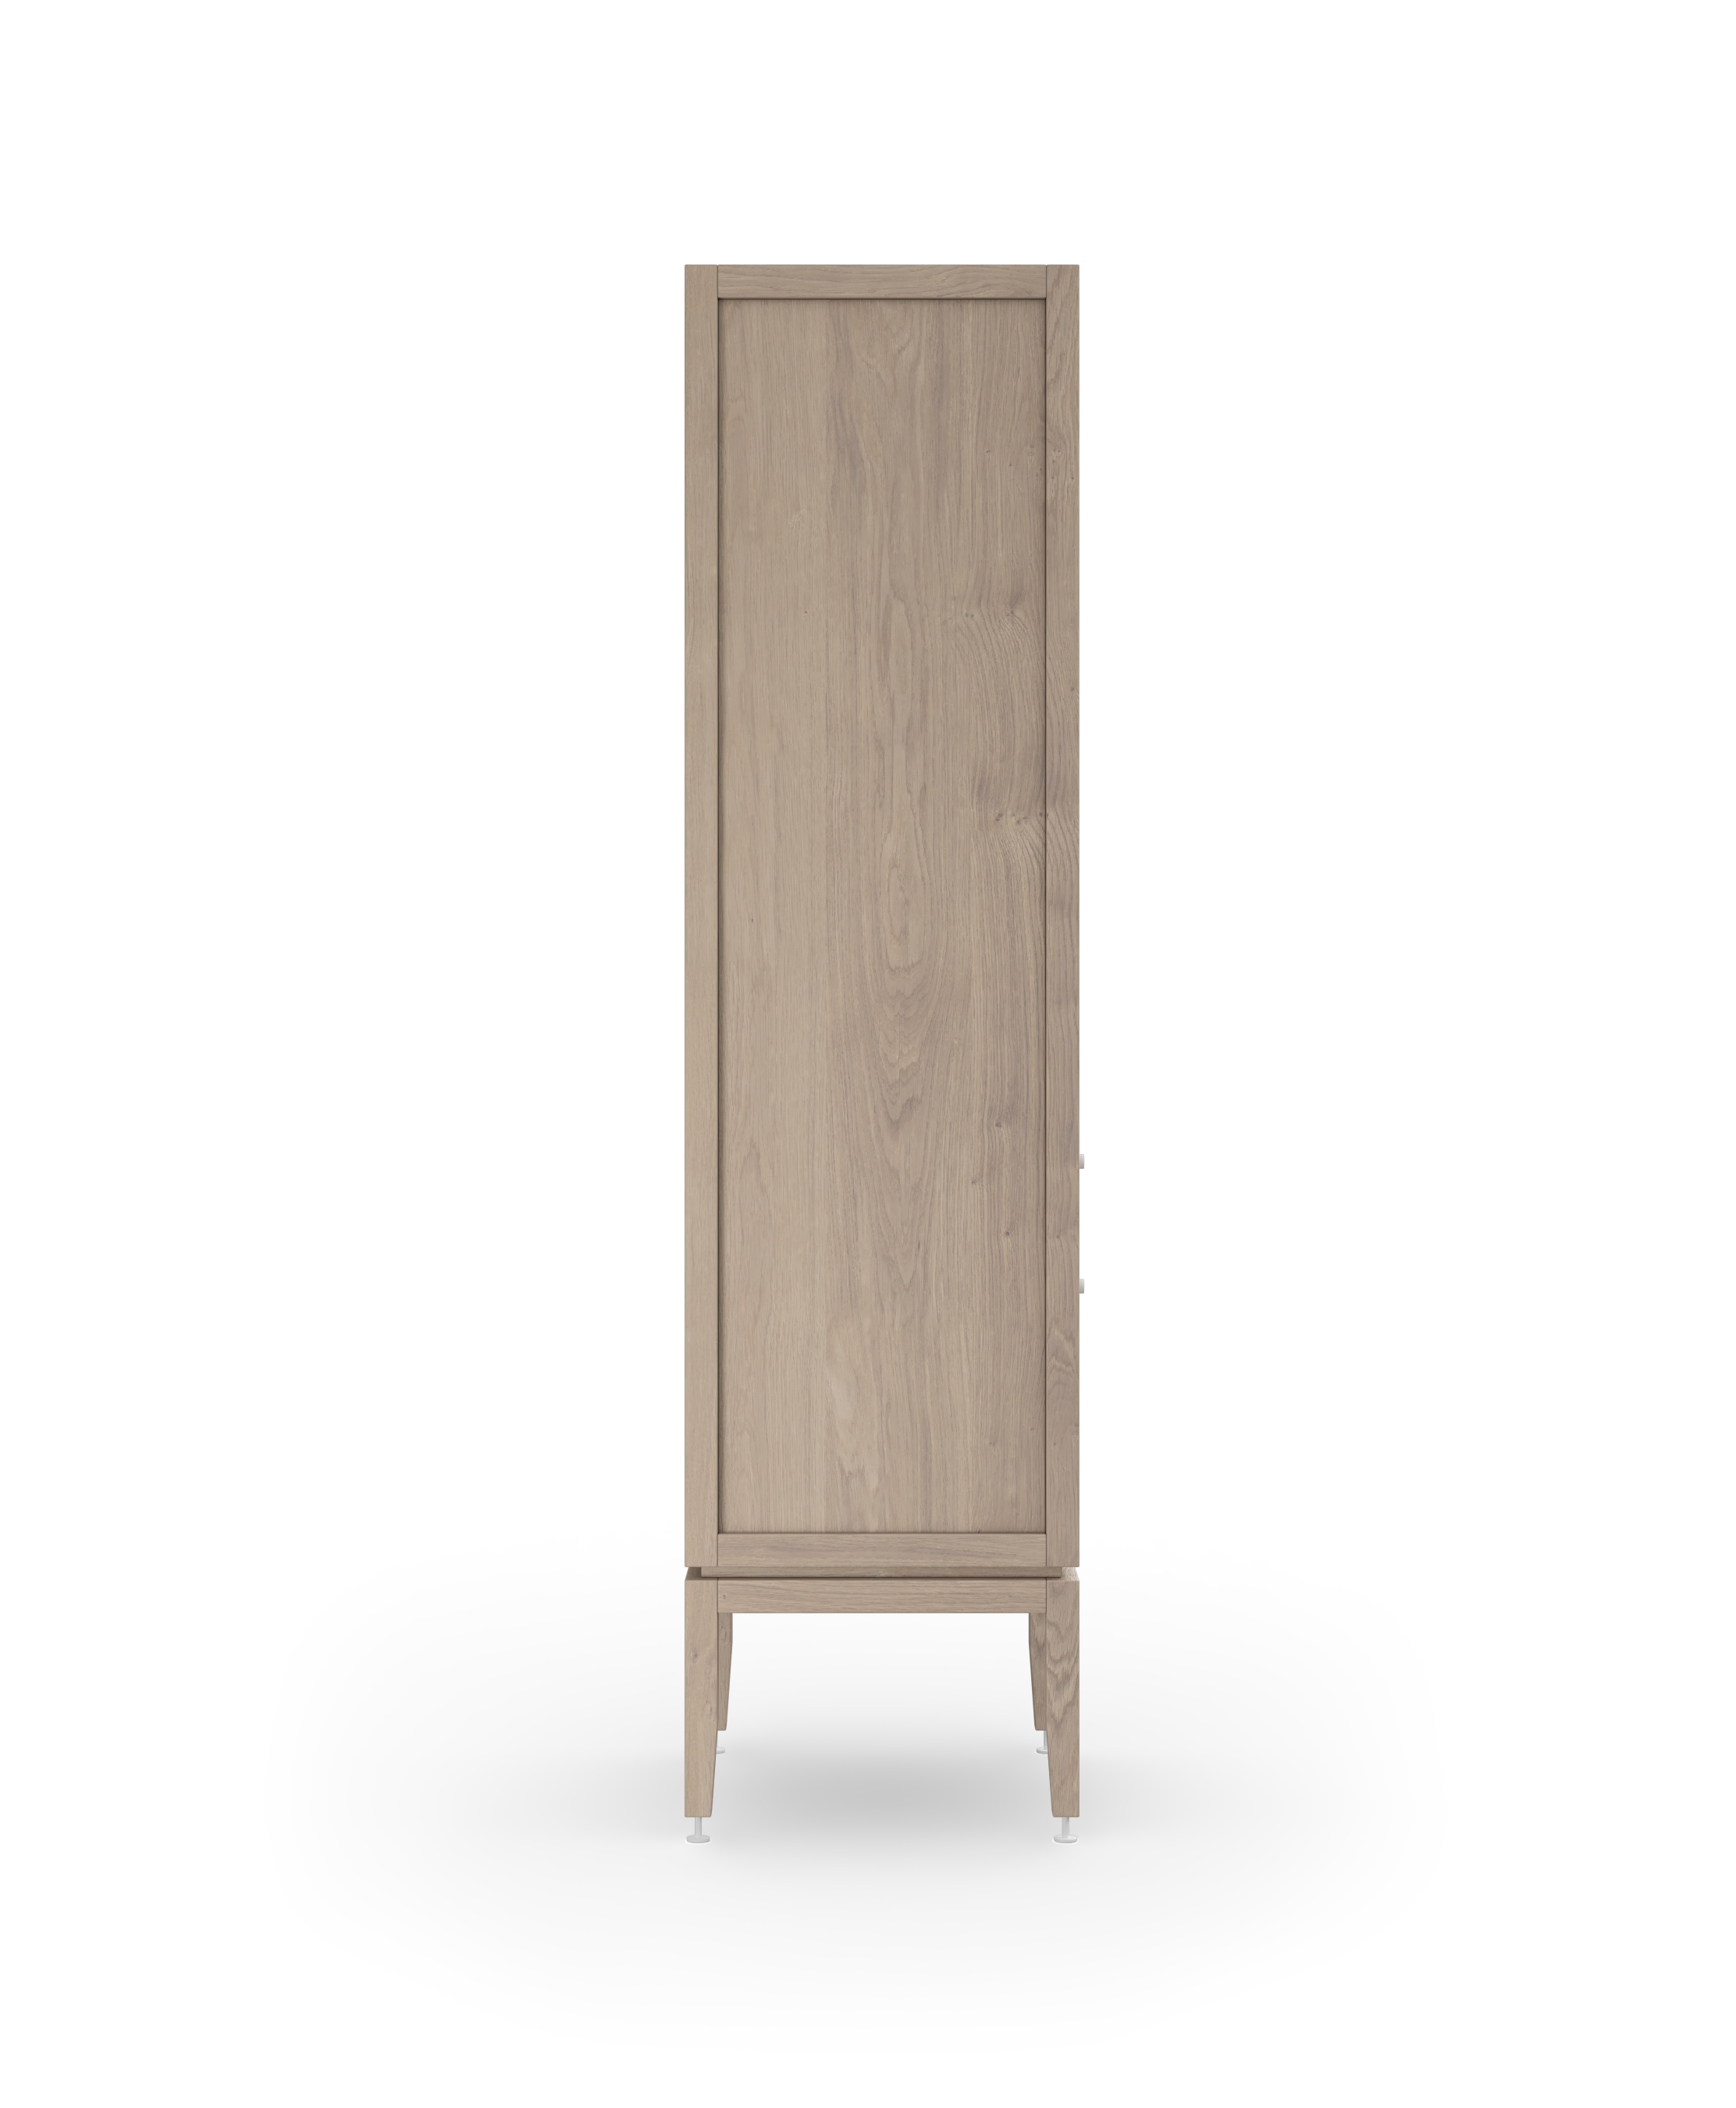 Coquo modular bathroom dresser with one door and two drawers in white stained oak with metal handles.